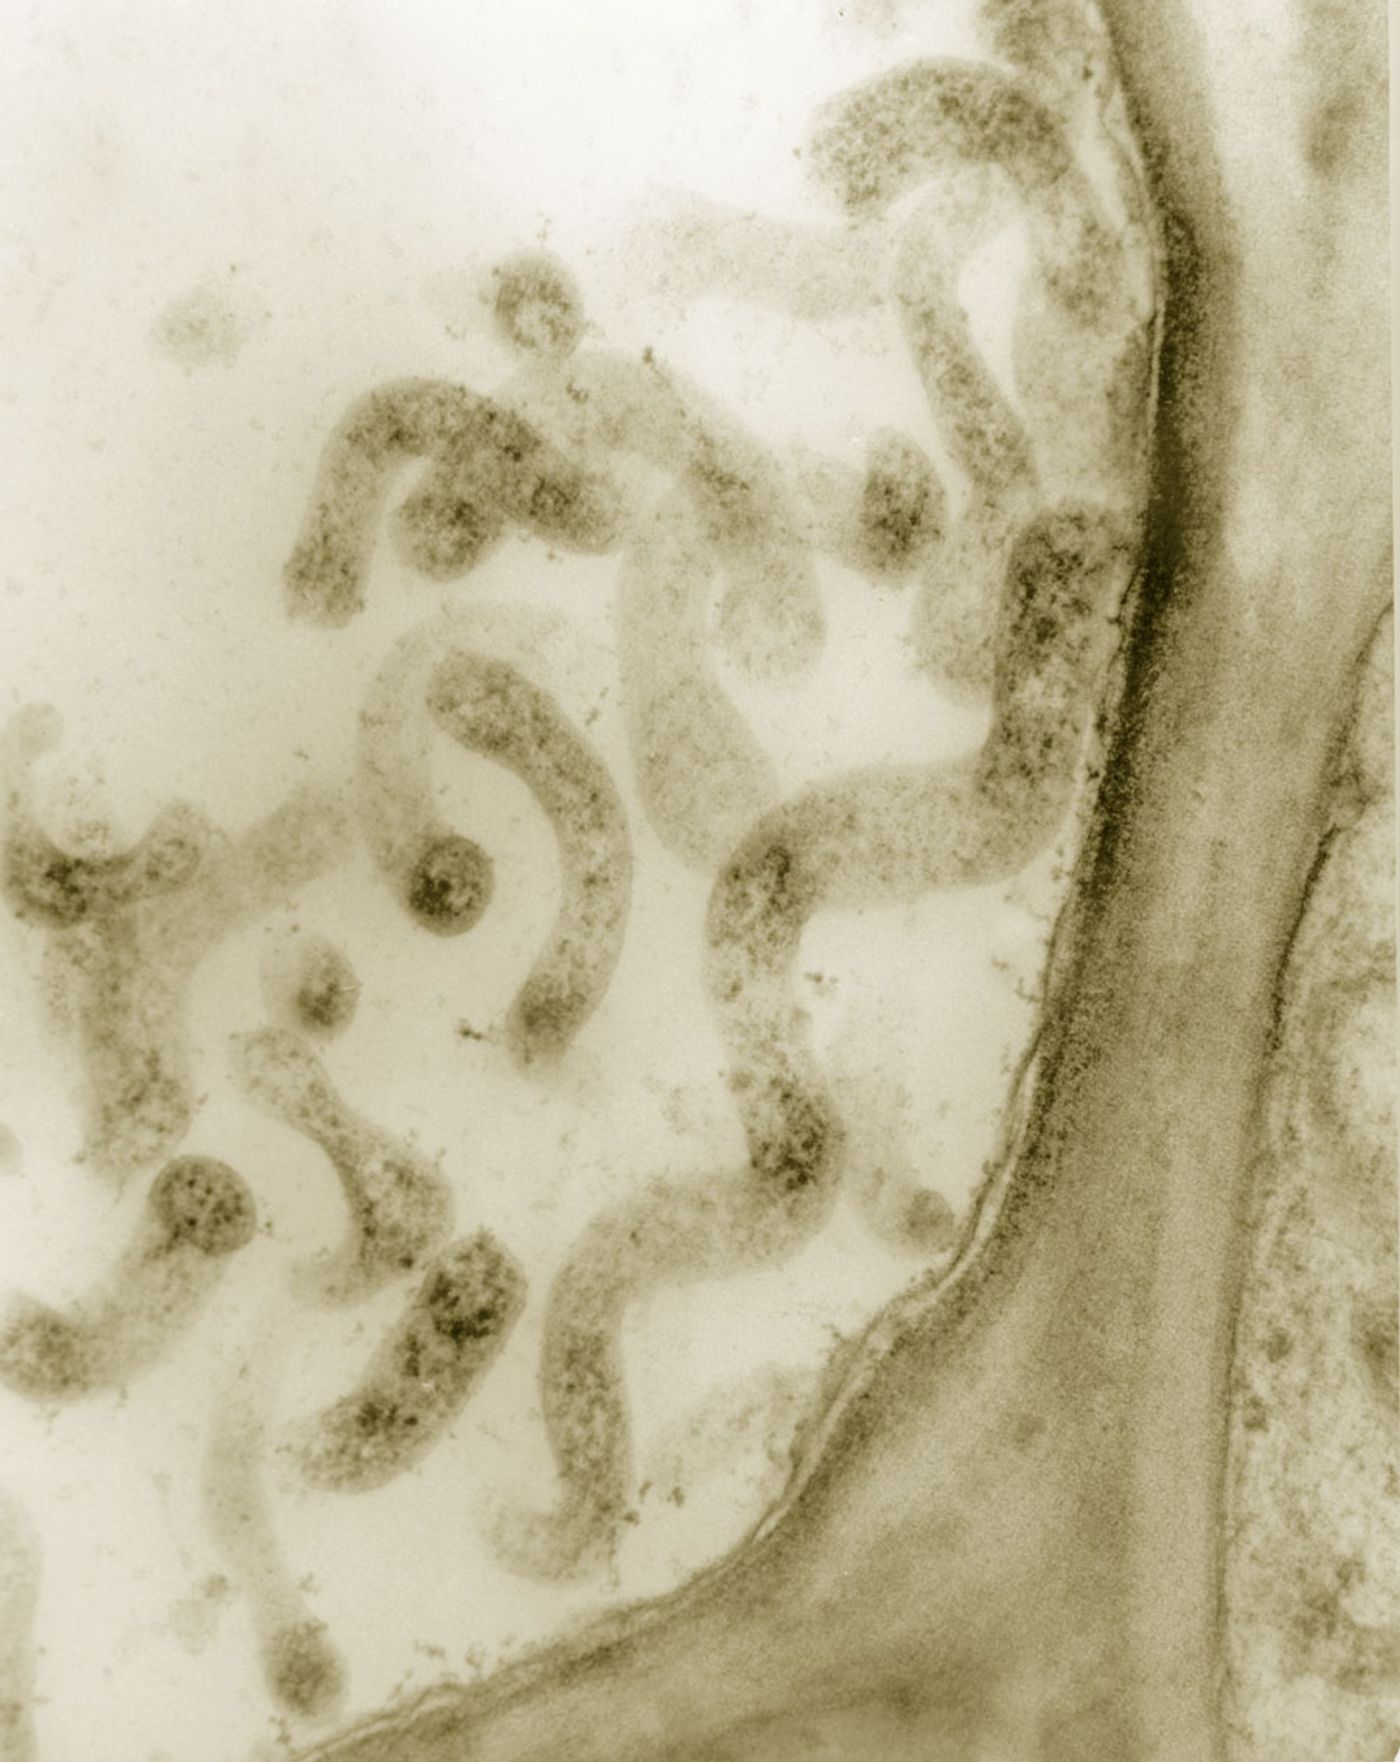 Spiroplasma are spiral-shaped bacteria.